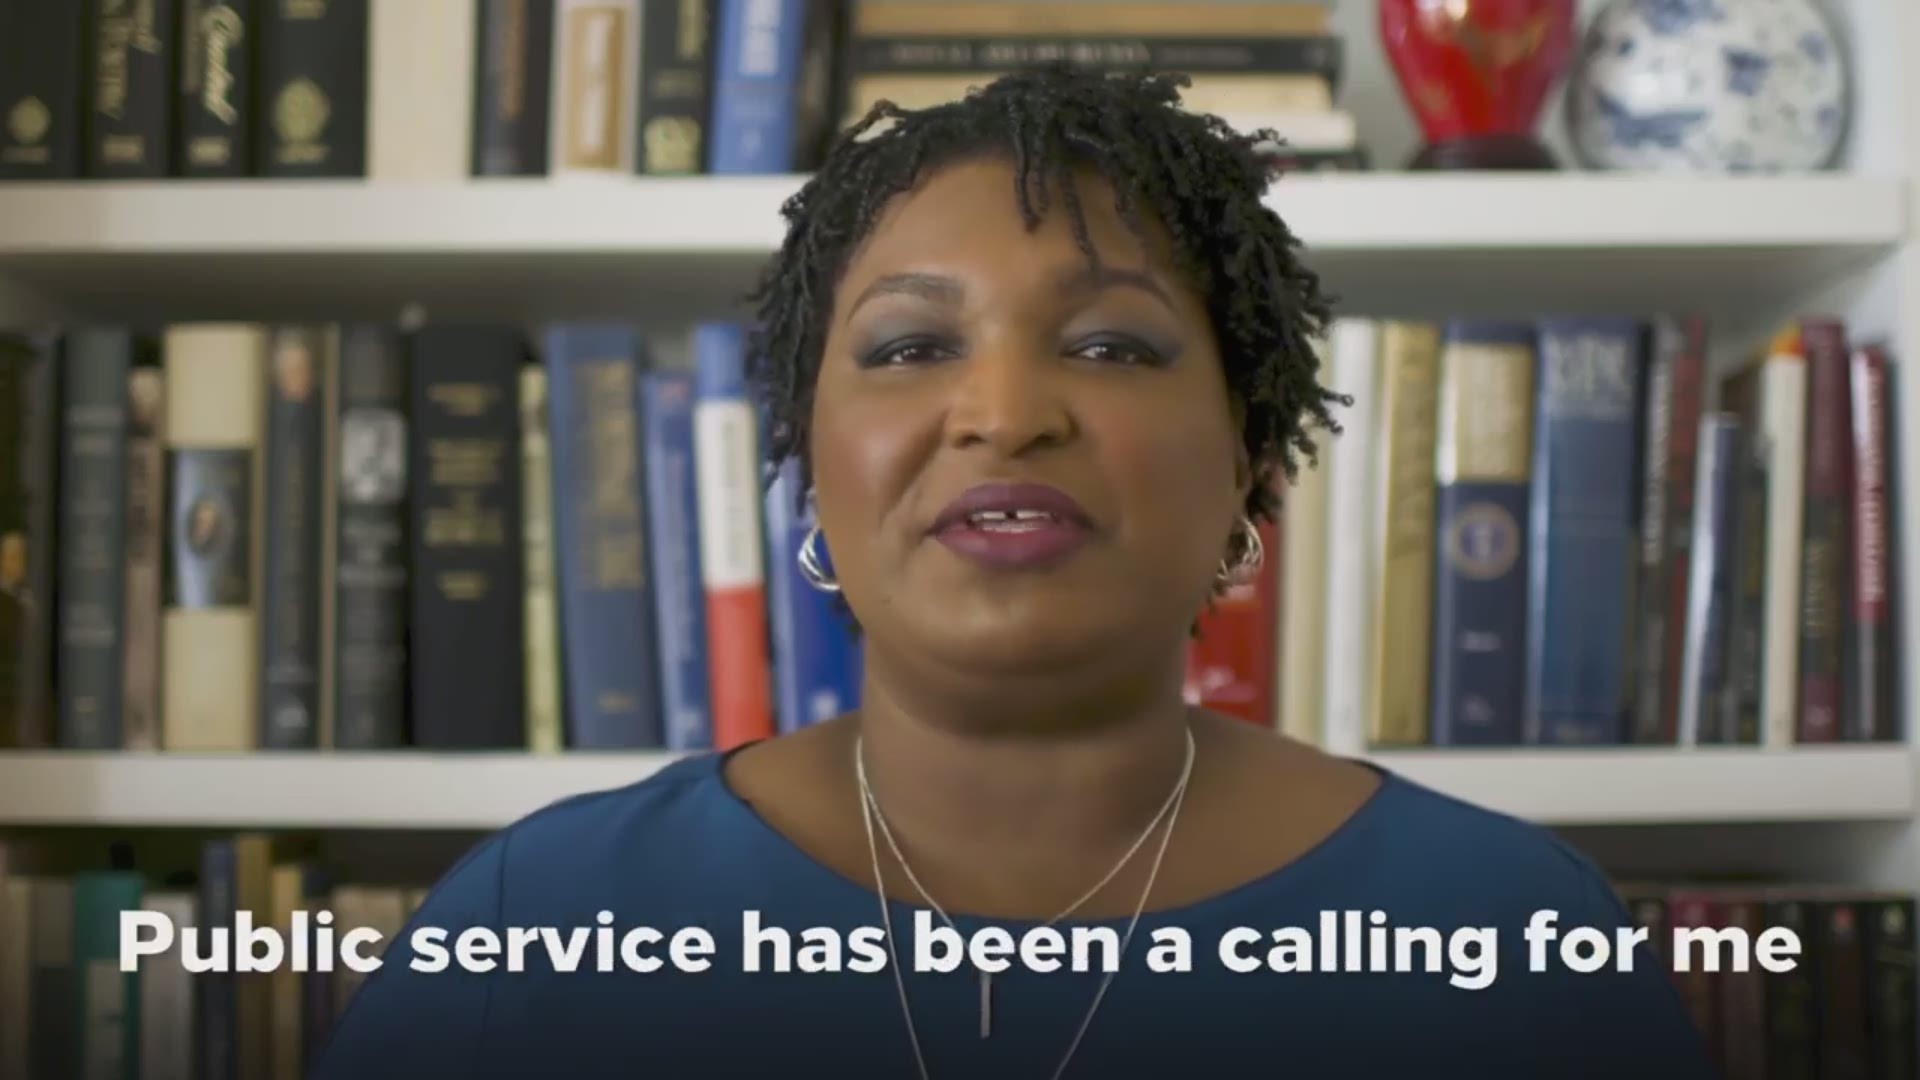 Video provided by Stacey Abrams.